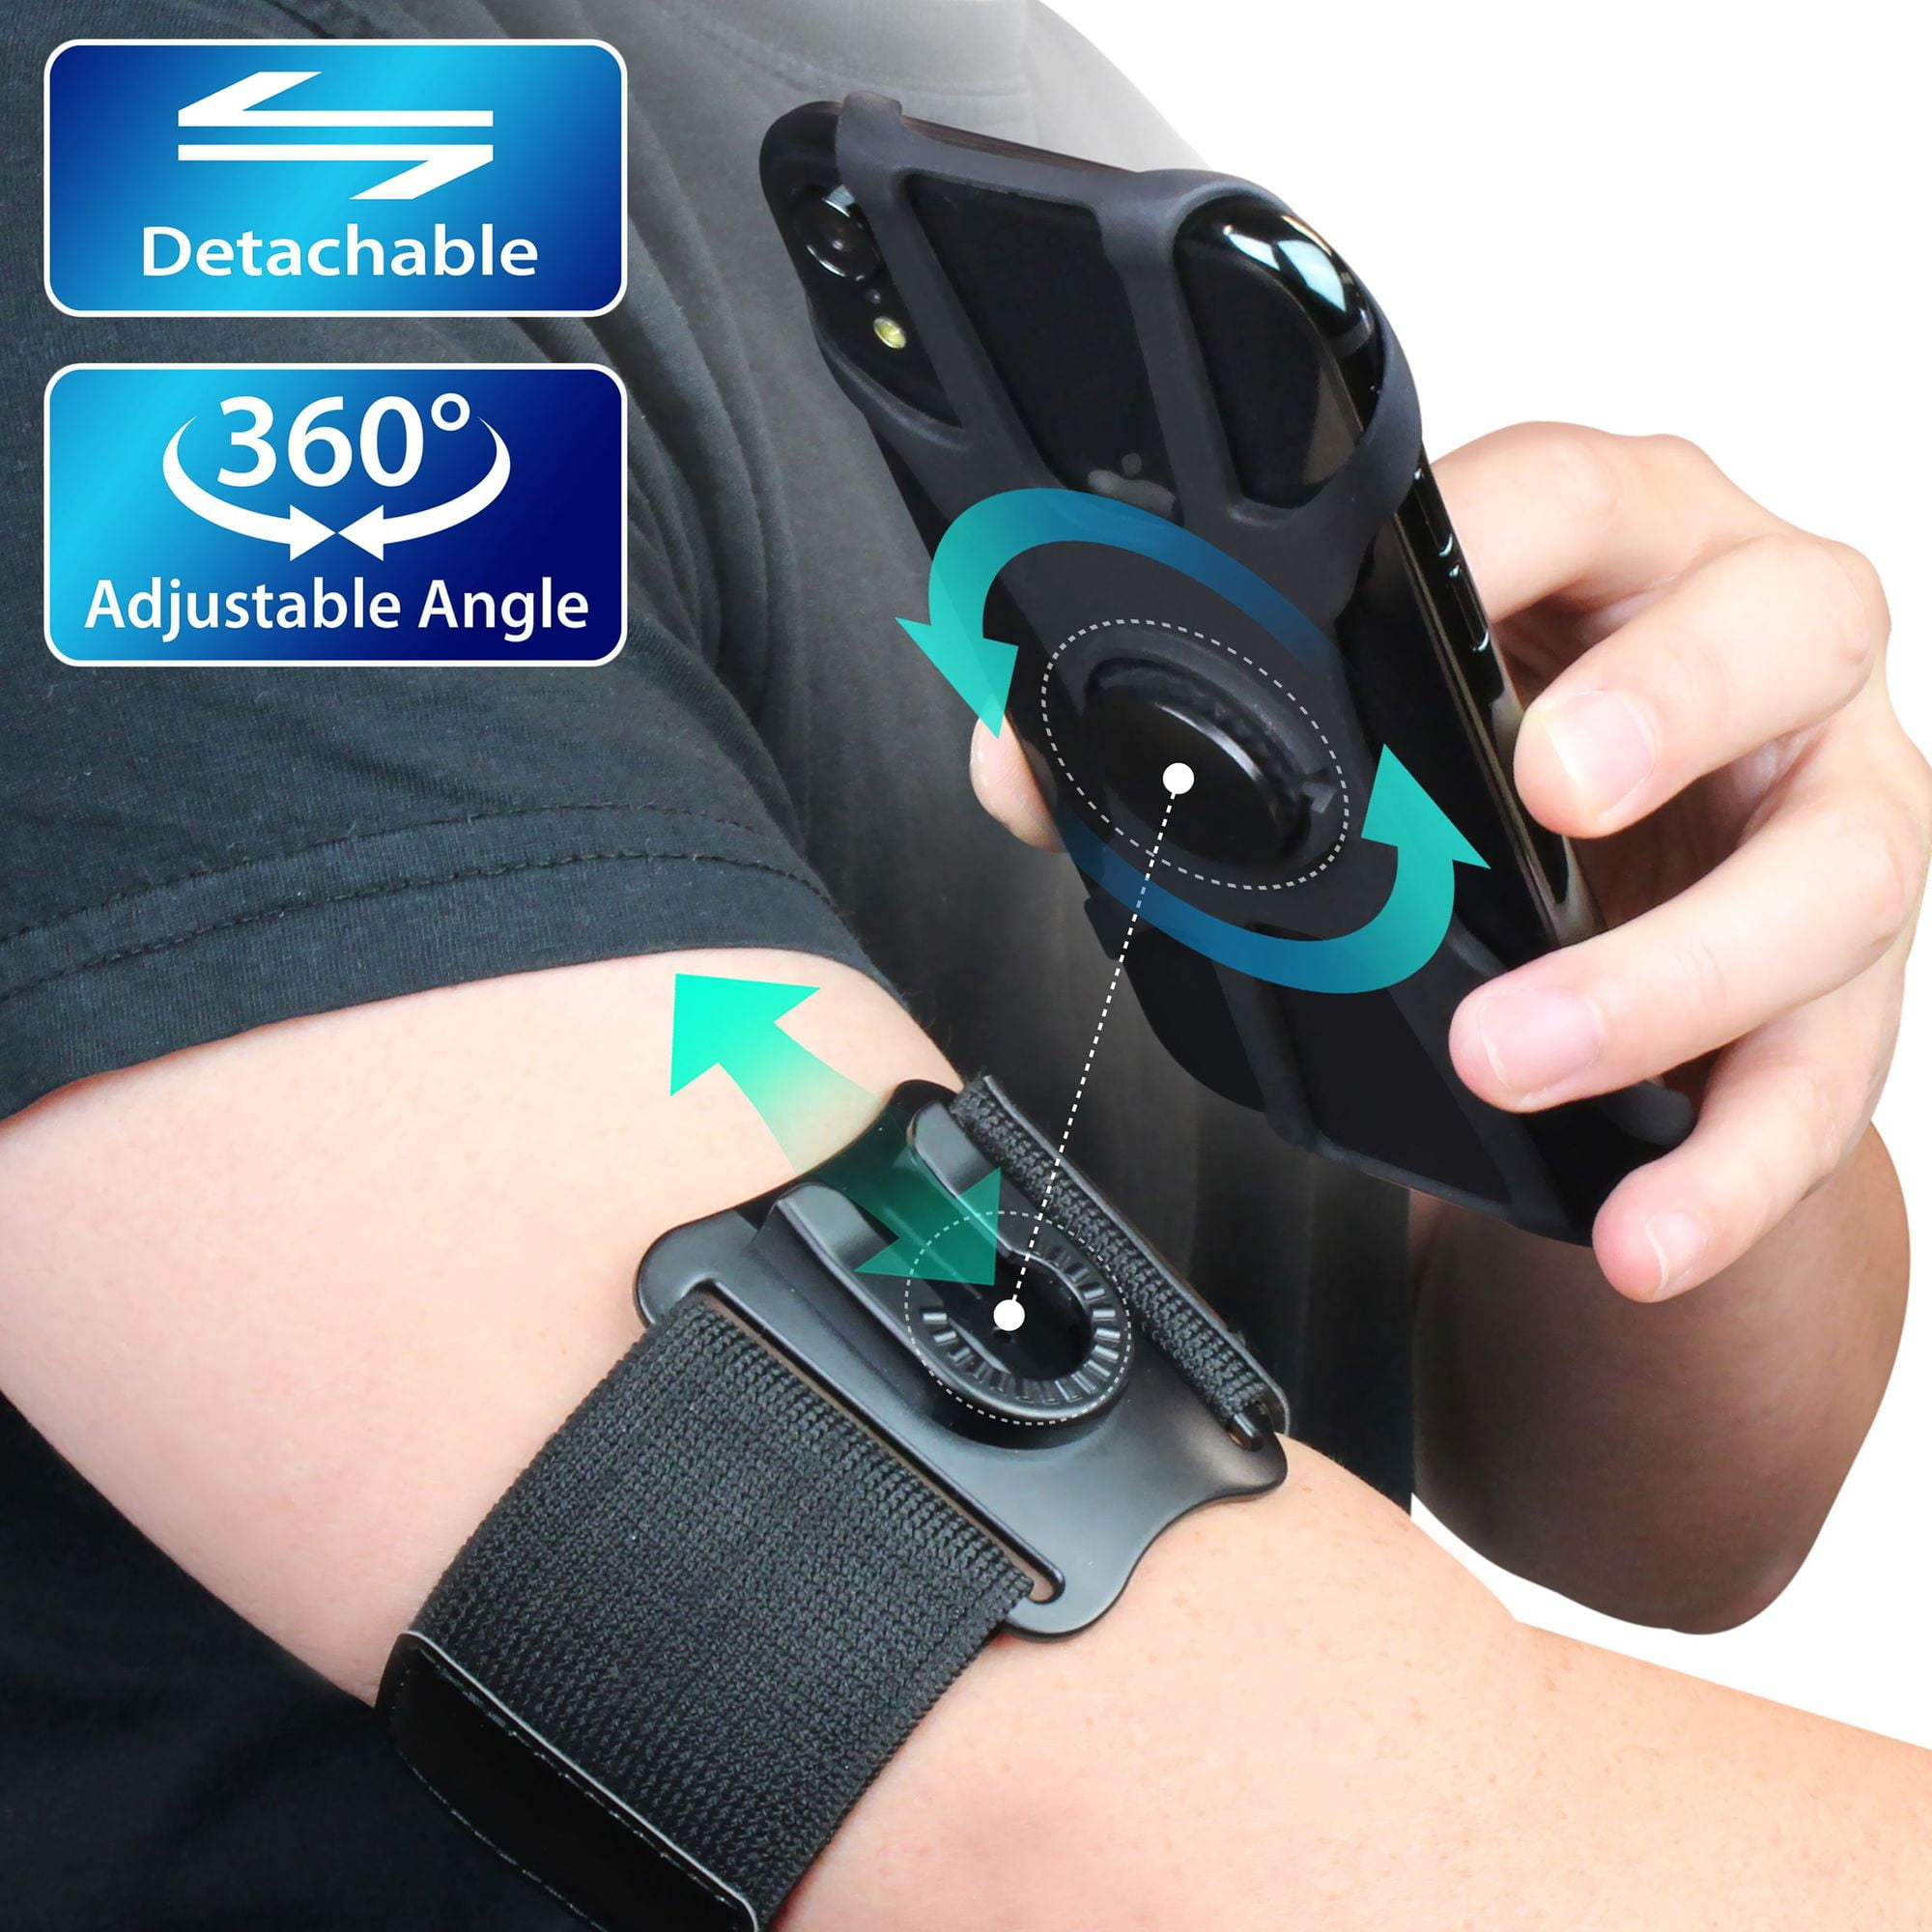 Outdoor Running Wrist Armband Sports Arm Band Bags Mobile Phone Holder Pouch gym